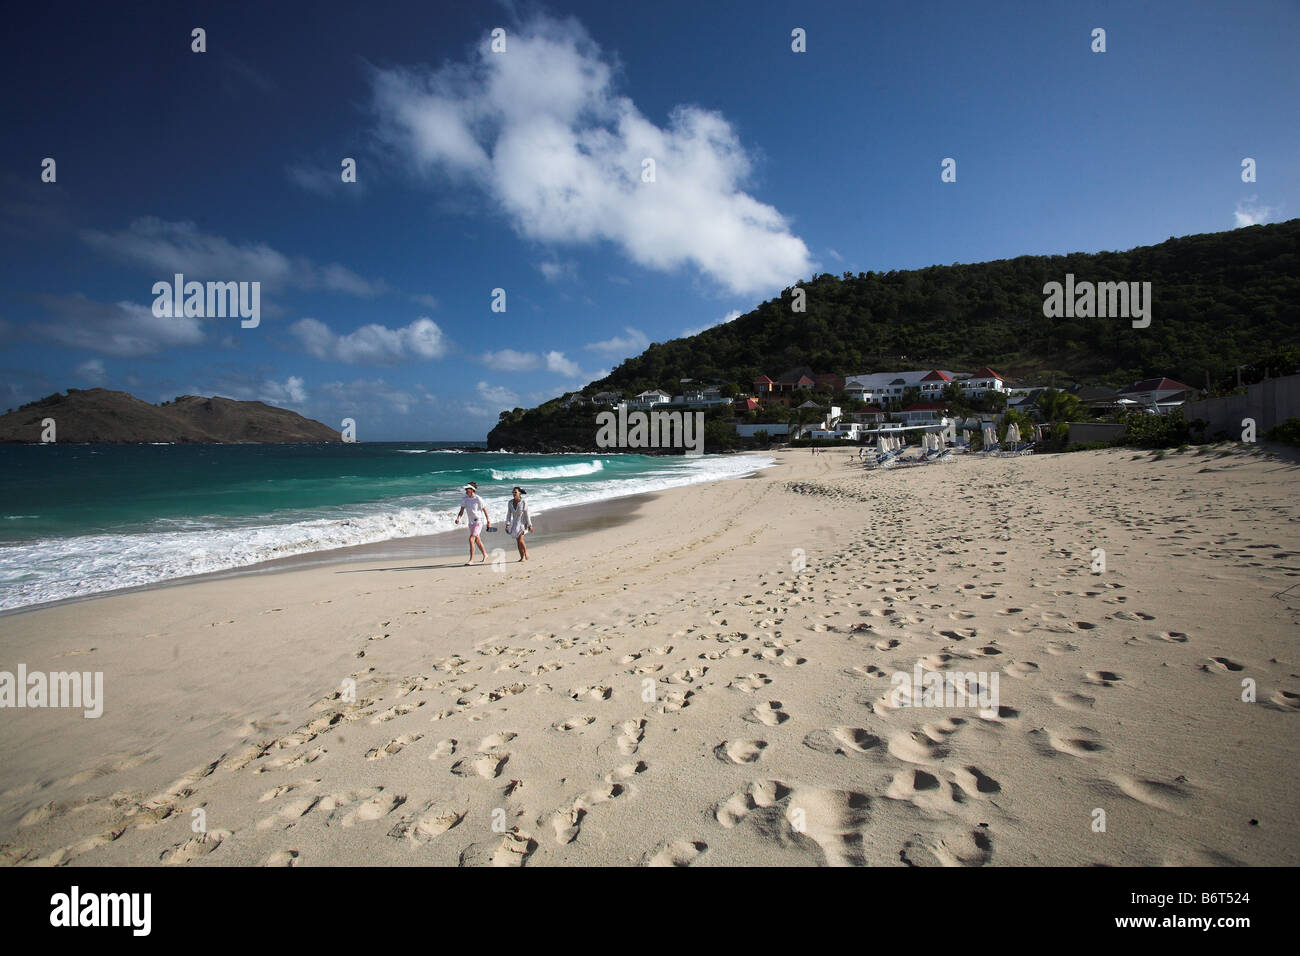 Beaches of St. Barts in the West Indies Stock Photo - Image of island,  beauty: 112043468